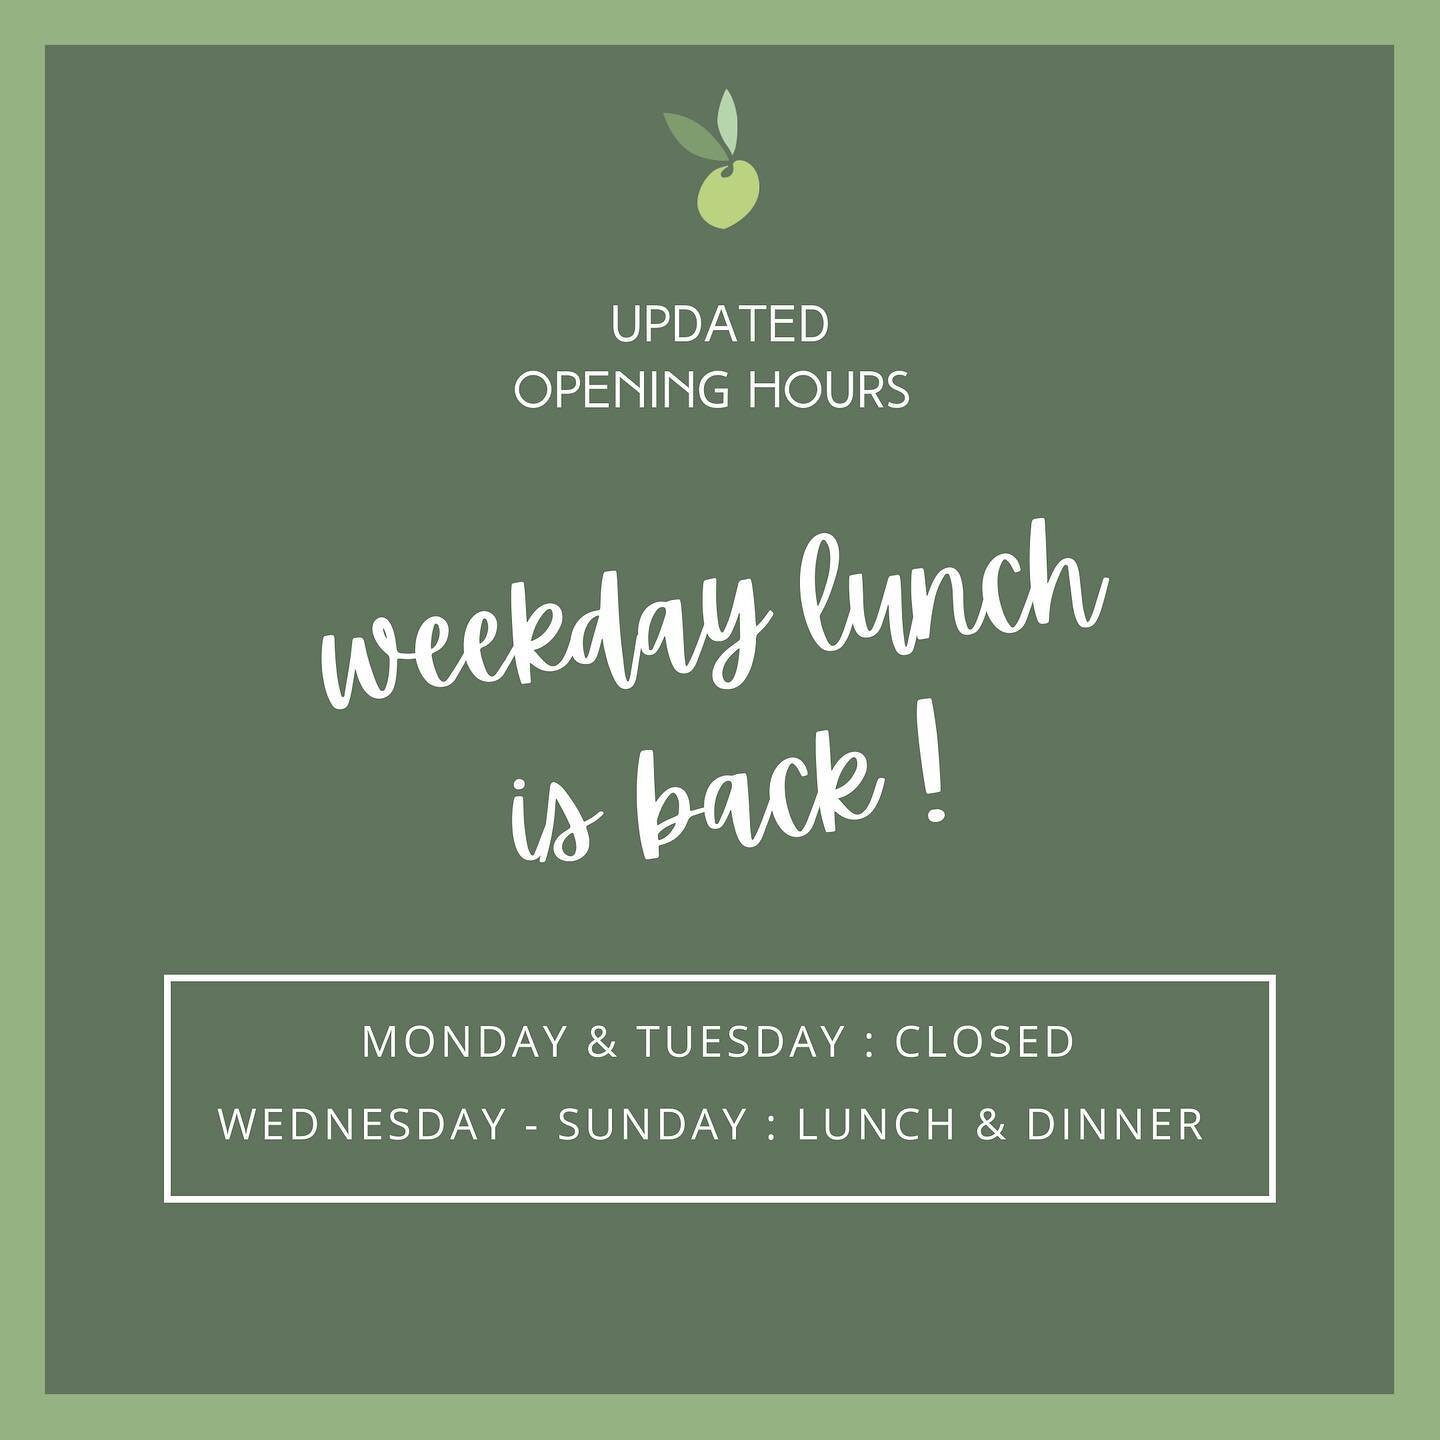 Lunch is back !!
So grab your friends, family or colleagues (pre orders welcome) and make a date. See you for lunch tomorrow 🍕🍝